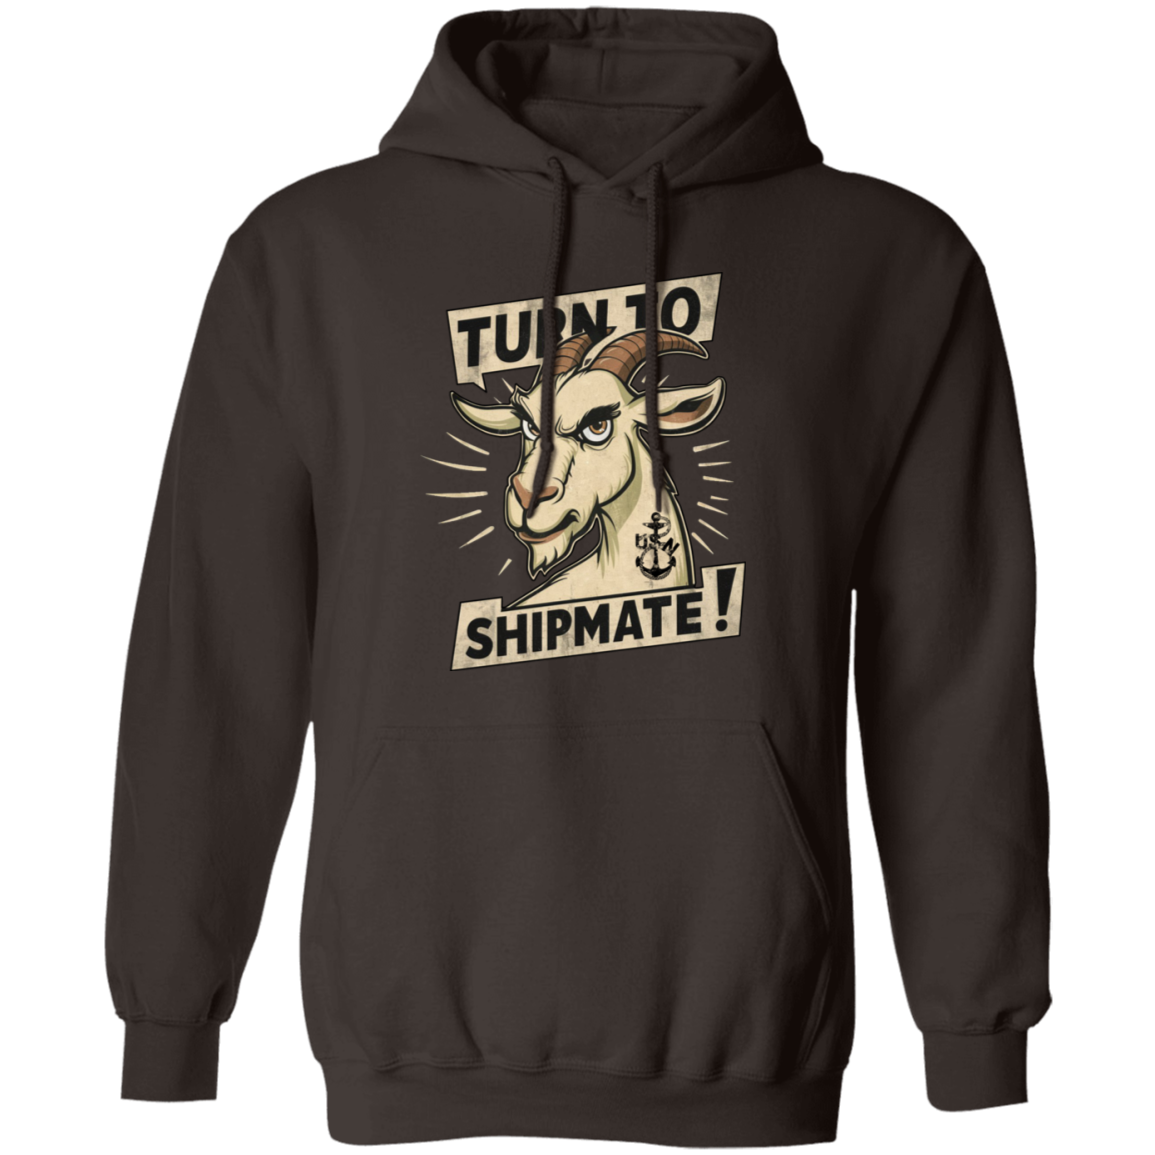 Turn To Shipmate Pullover Hoodie